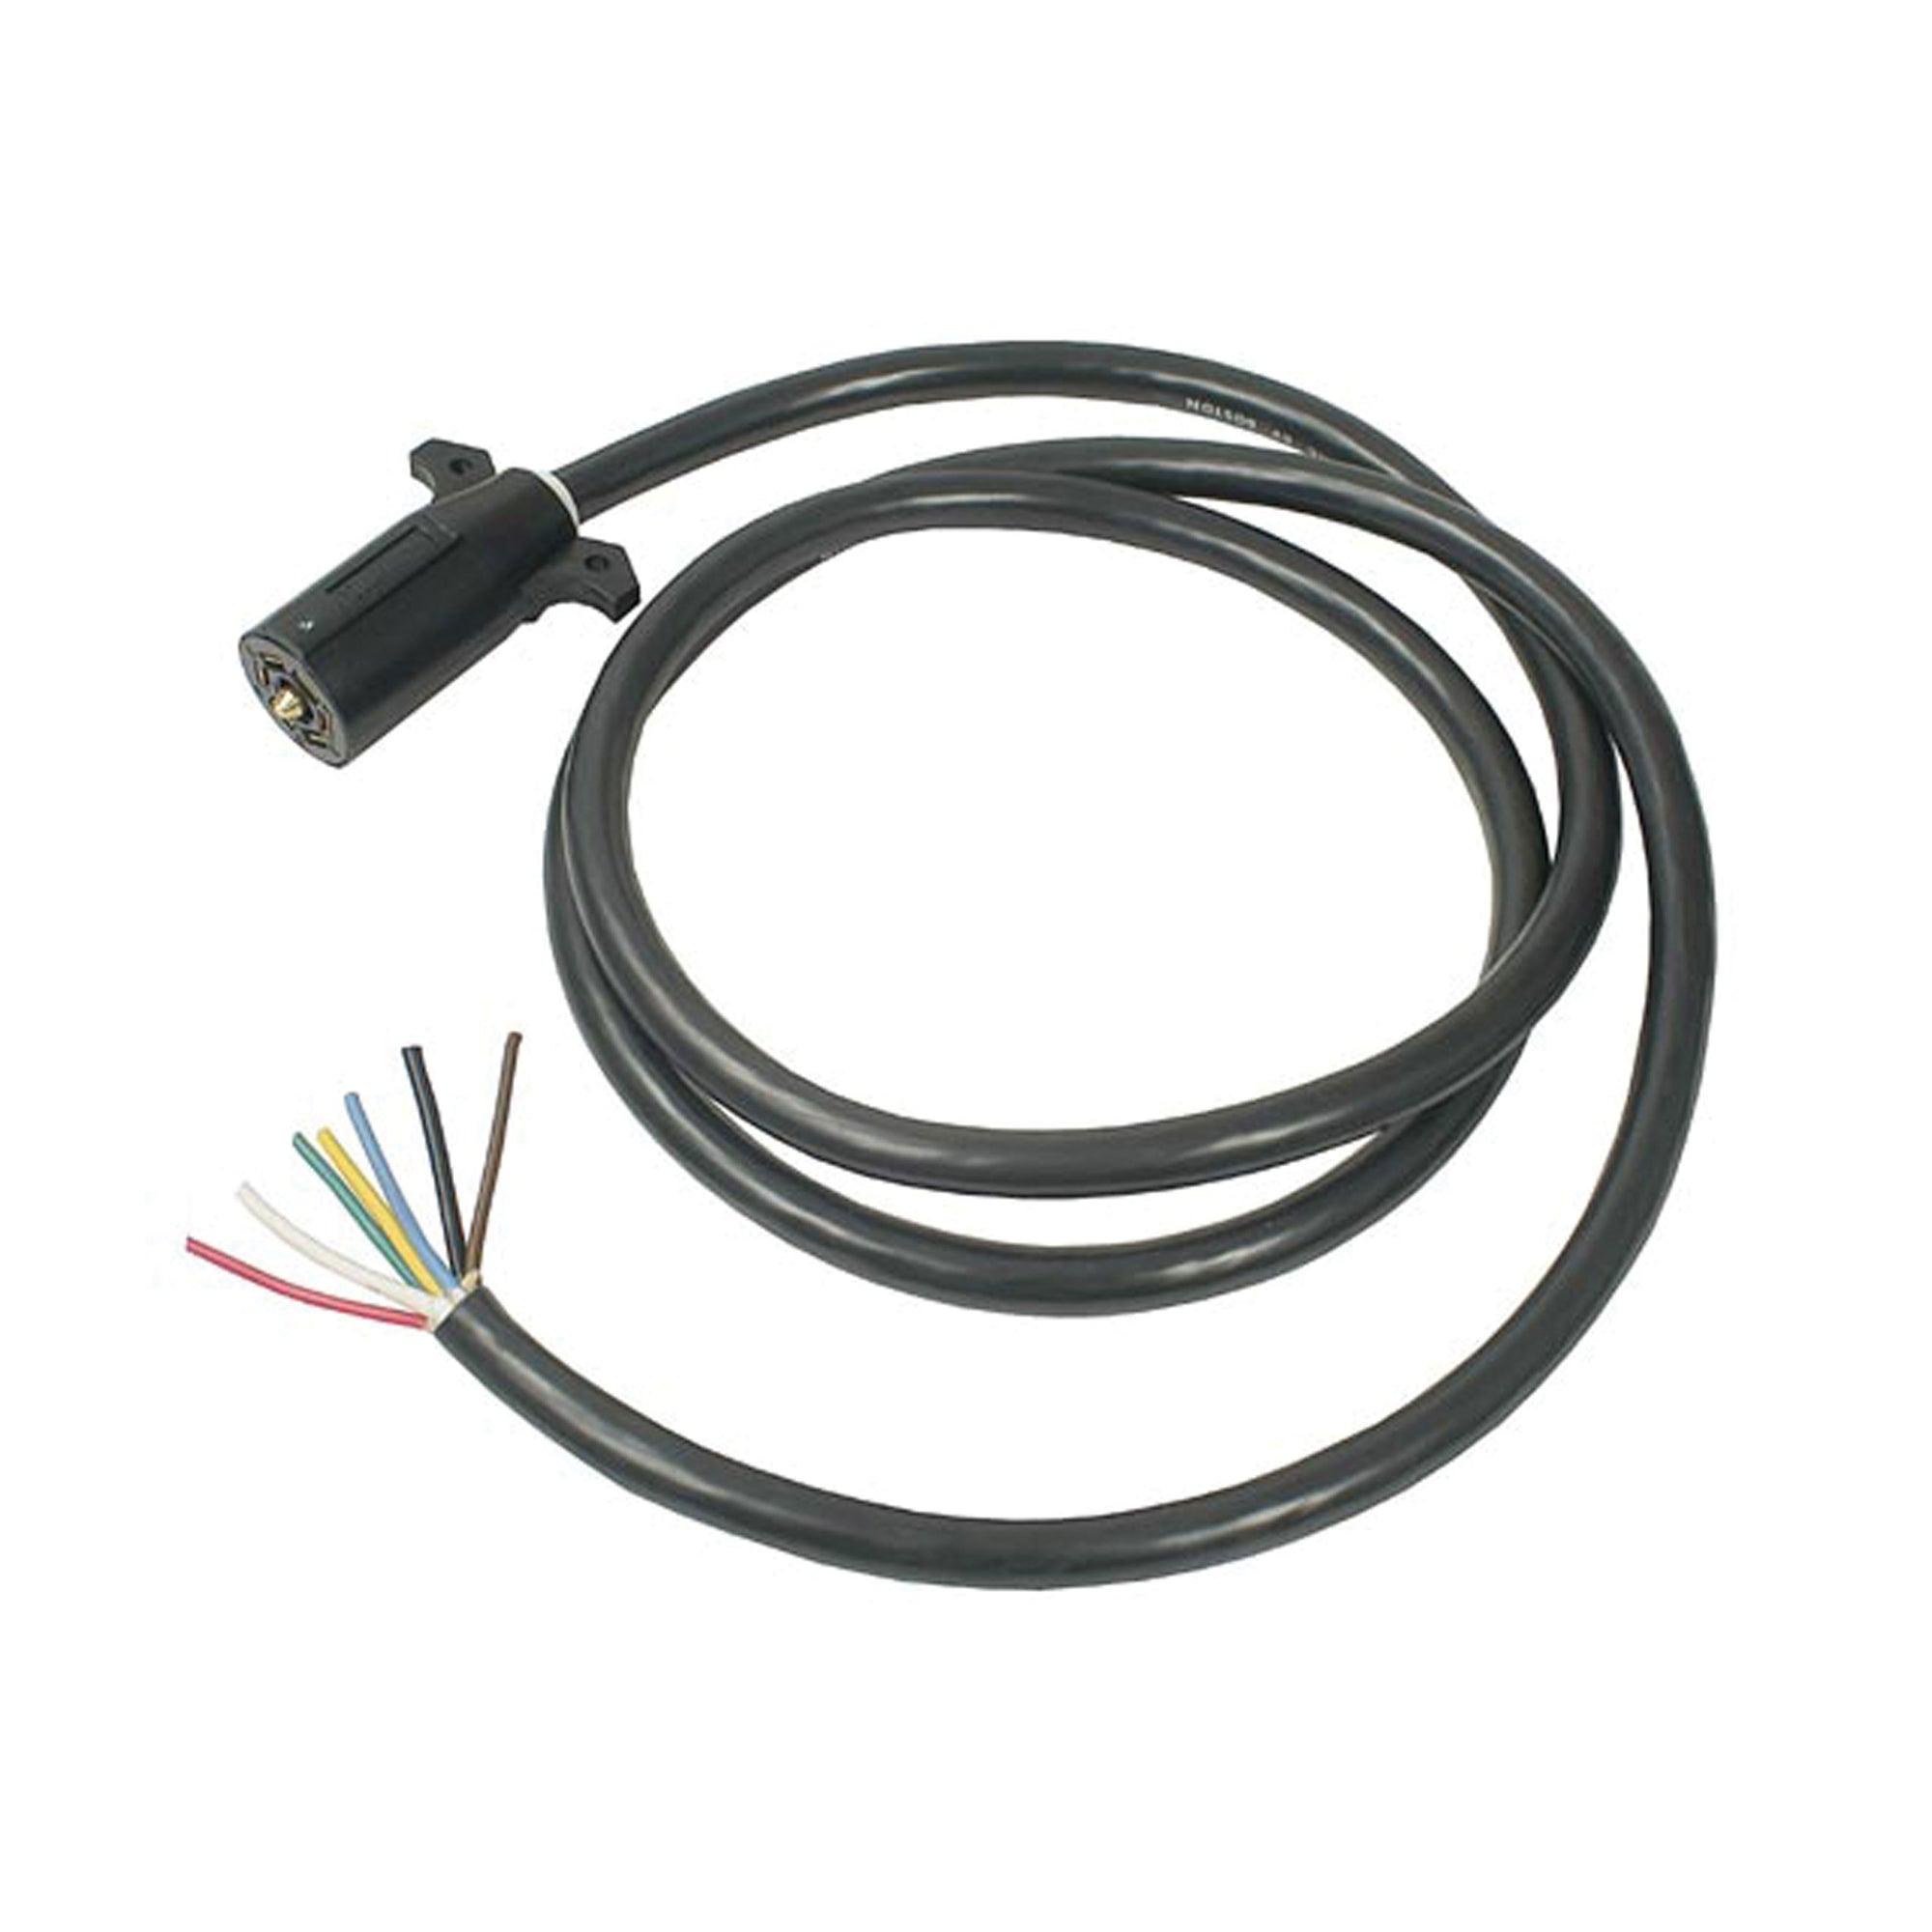 Pollak 14-117 7-Way RV Trailer End Cable with Plug - 8'